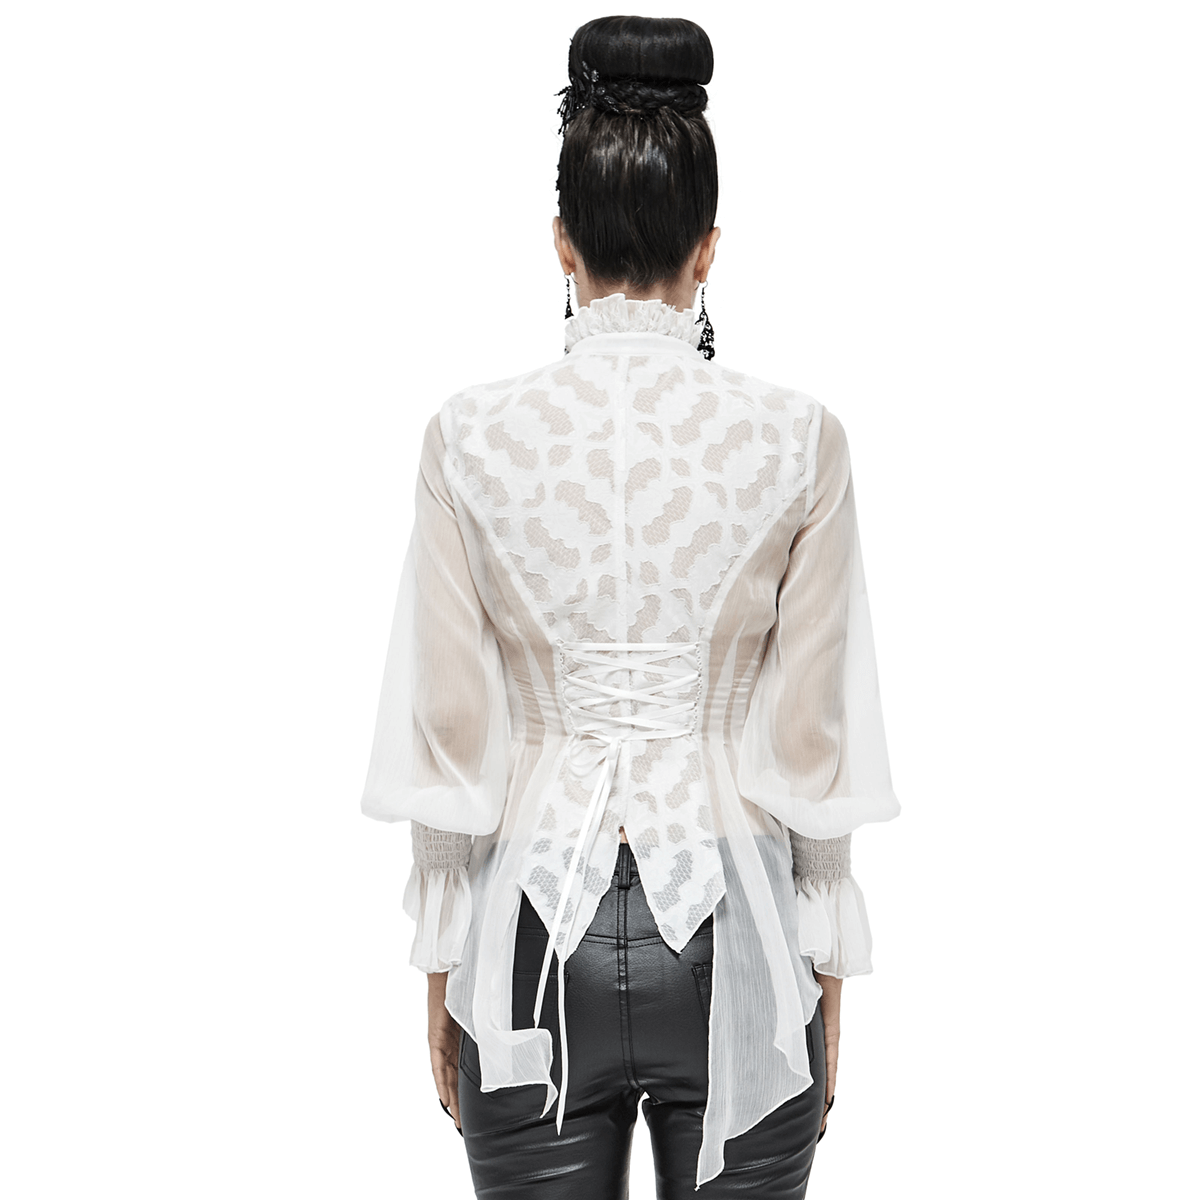 Vintage Chiffon Lace Petal Sleeve Shirt For Women / Gothic White Ladies High Collar Blouse - HARD'N'HEAVY